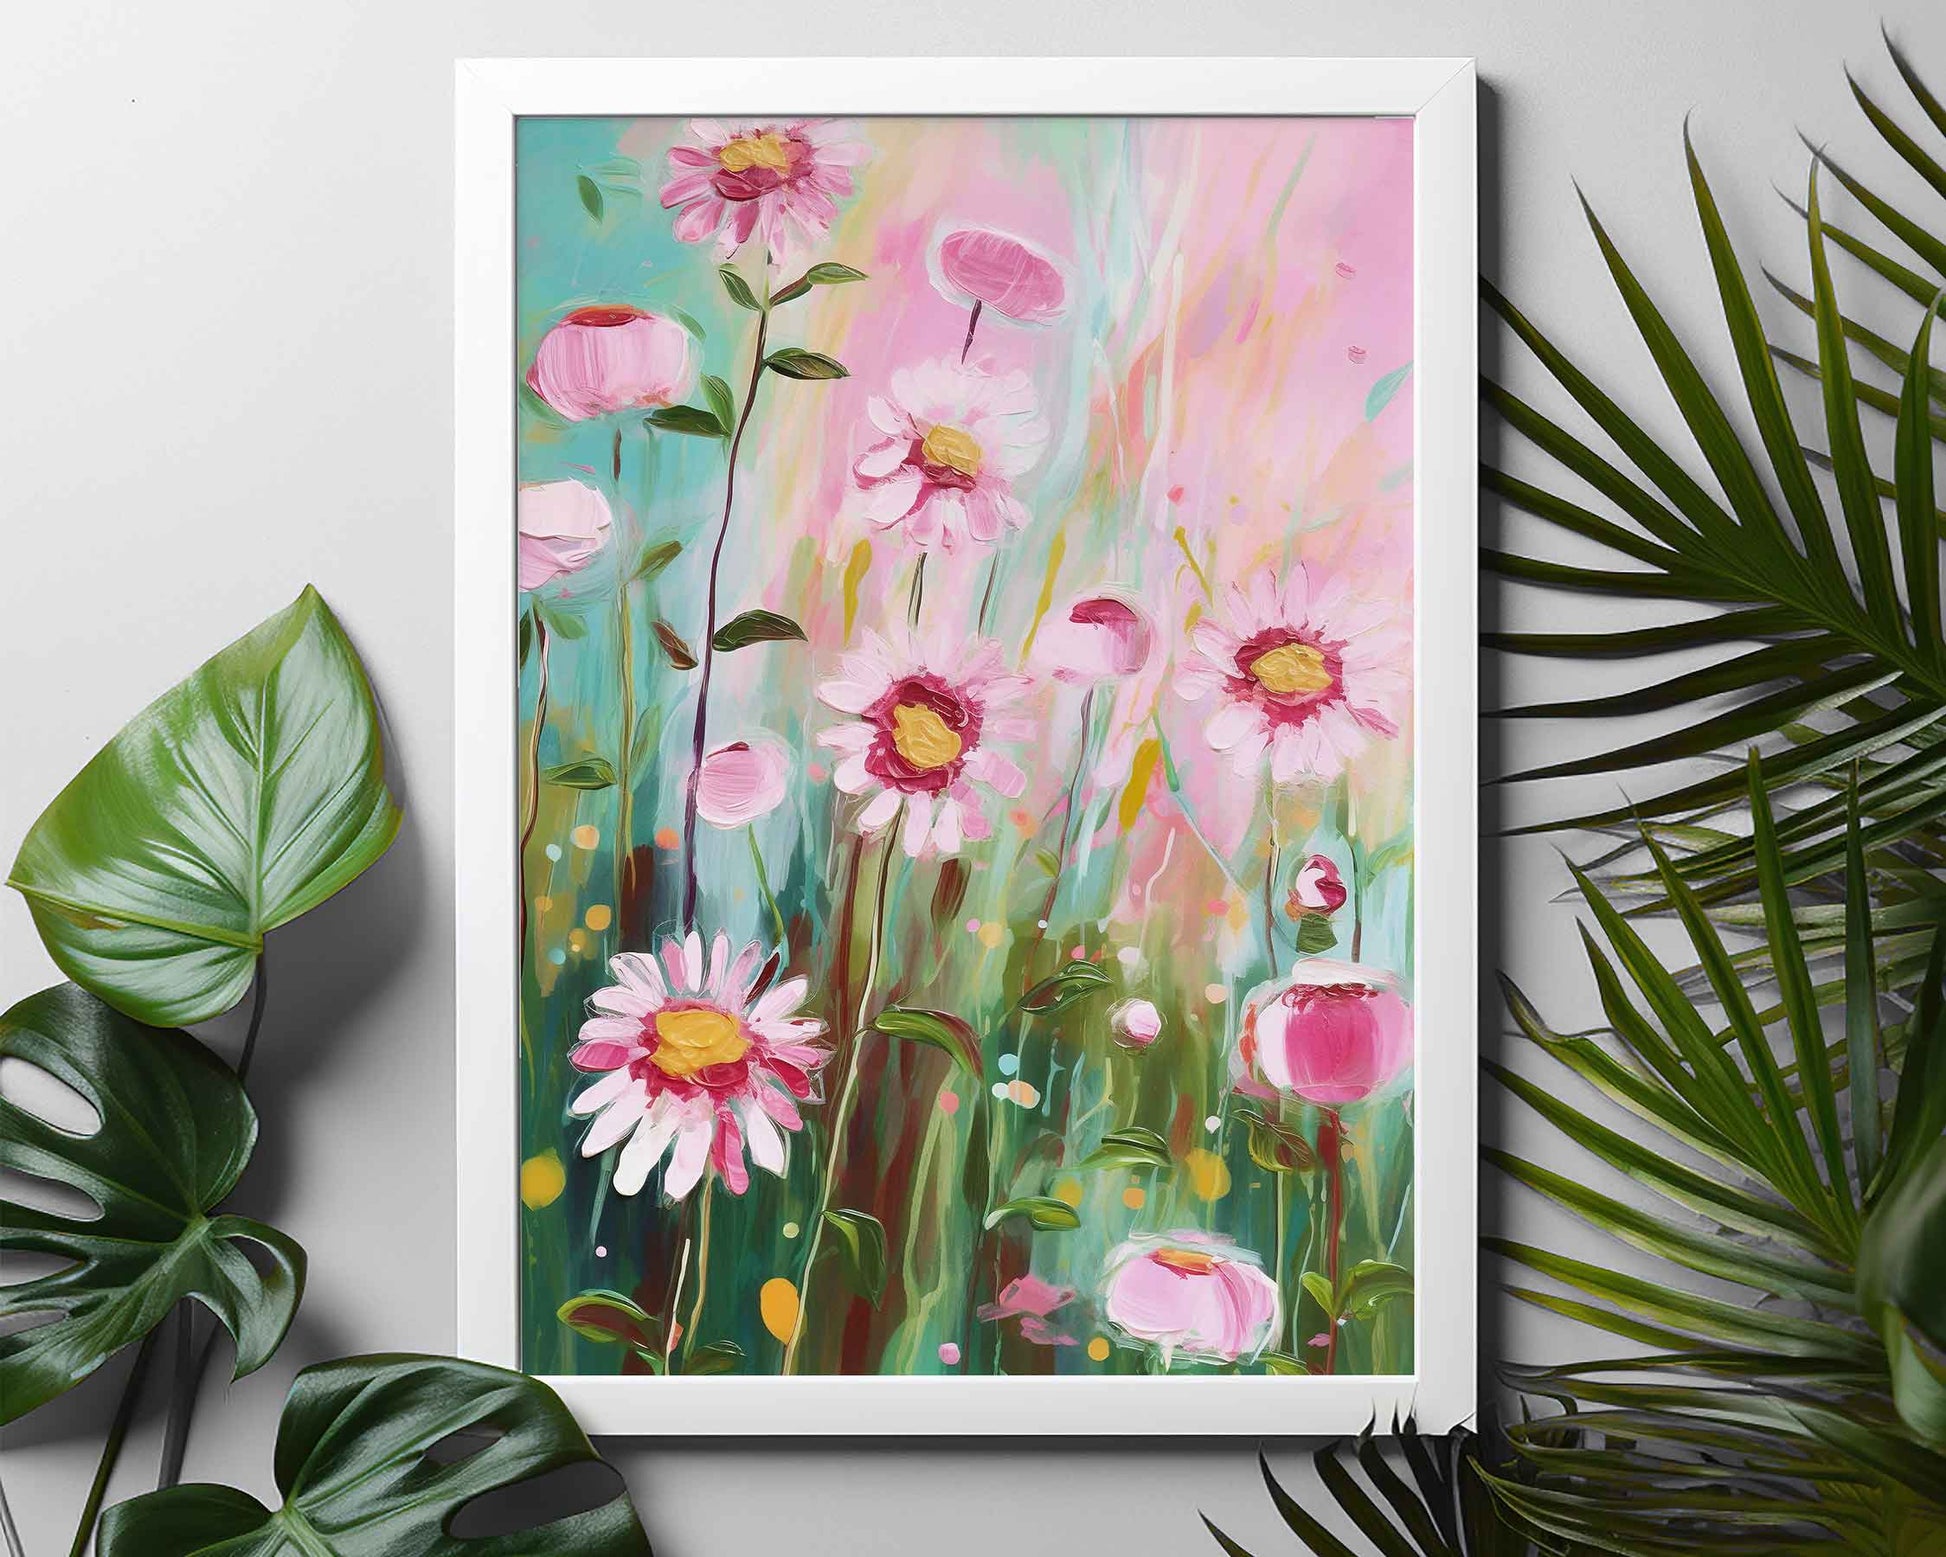 Framed Image of Abstract Pink Flowers Vintage Oil Paintings Wall Art Print Poster Gift